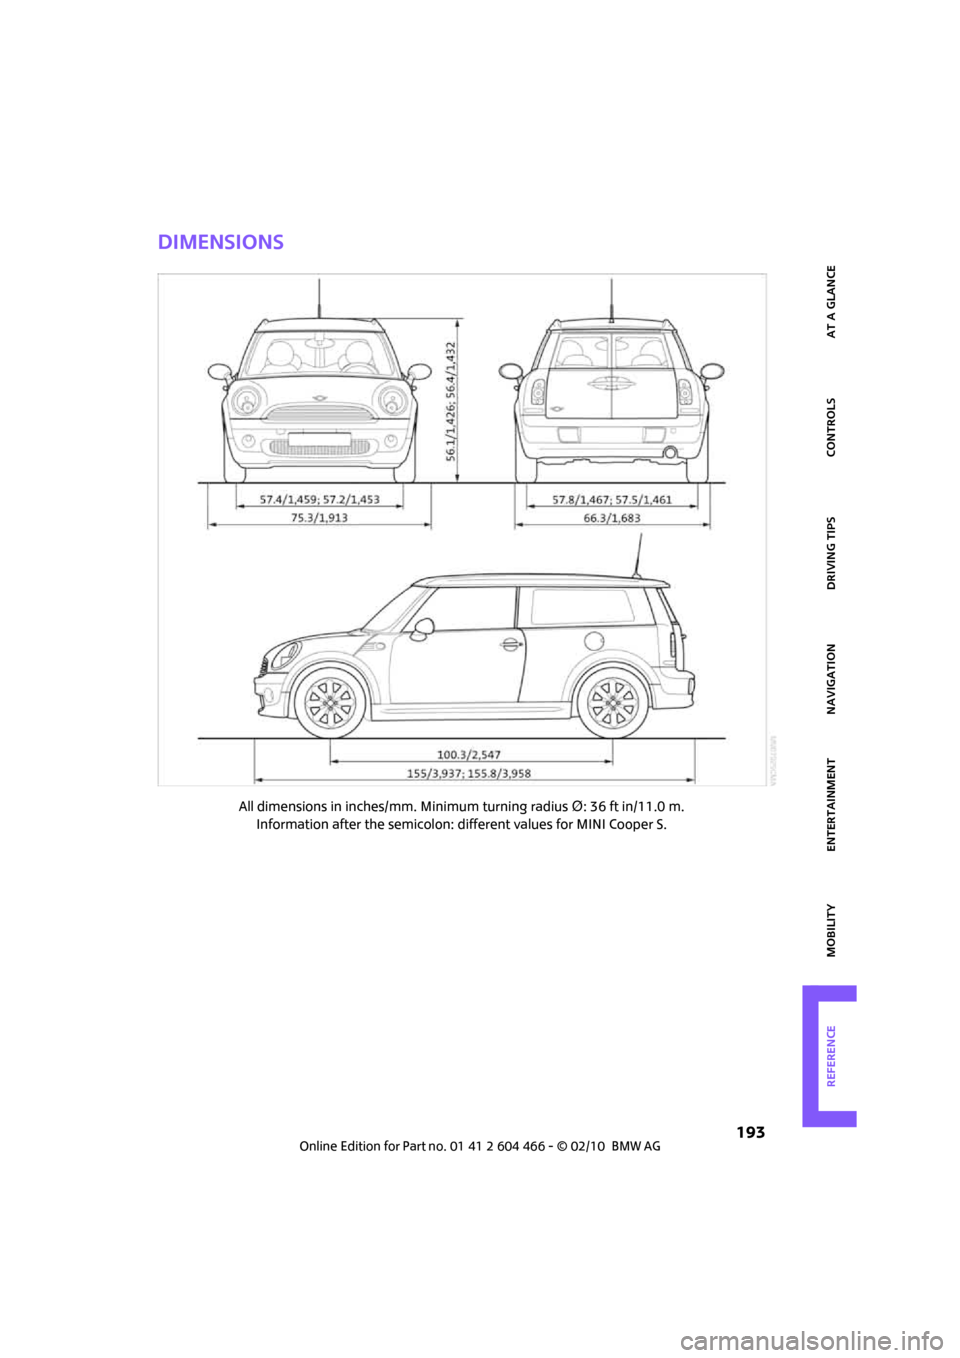 MINI Clubman 2010  Owners Manual (Mini Connected) MOBILITYAT A GLANCE CONTROLS DRIVING TIPS ENTERTAINMENT
 193
NAVIGATION REFERENCE
Dimensions
All dimensions in inches/mm. Minimum turning radius Δ: 36 ft in/11.0 m. 
Information after the semicolon: 